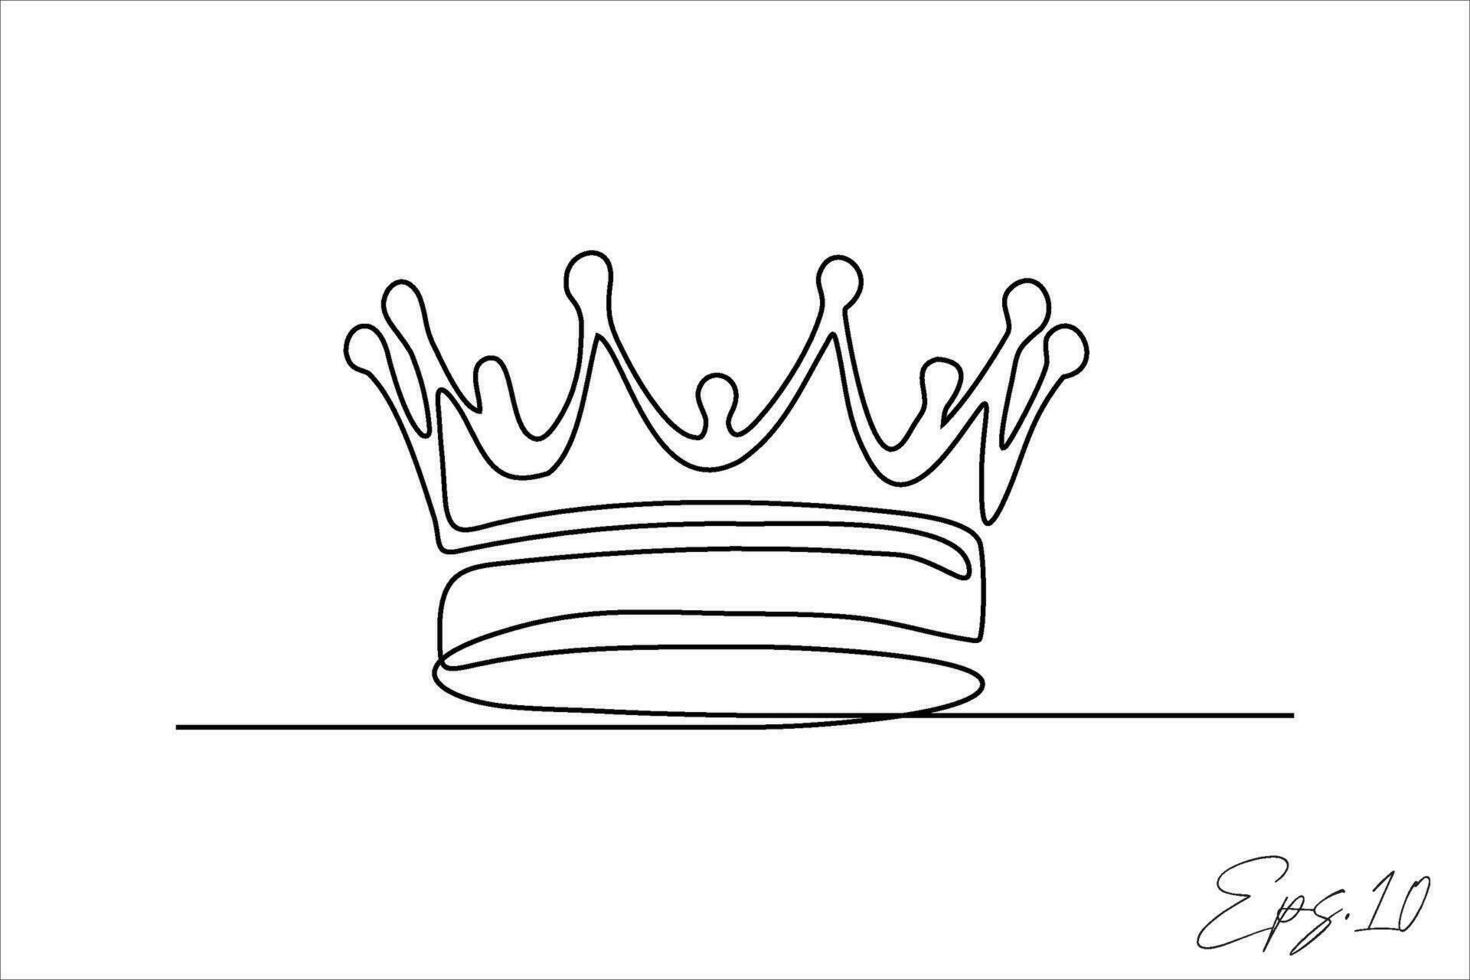 continuous line art drawing of king's crown vector